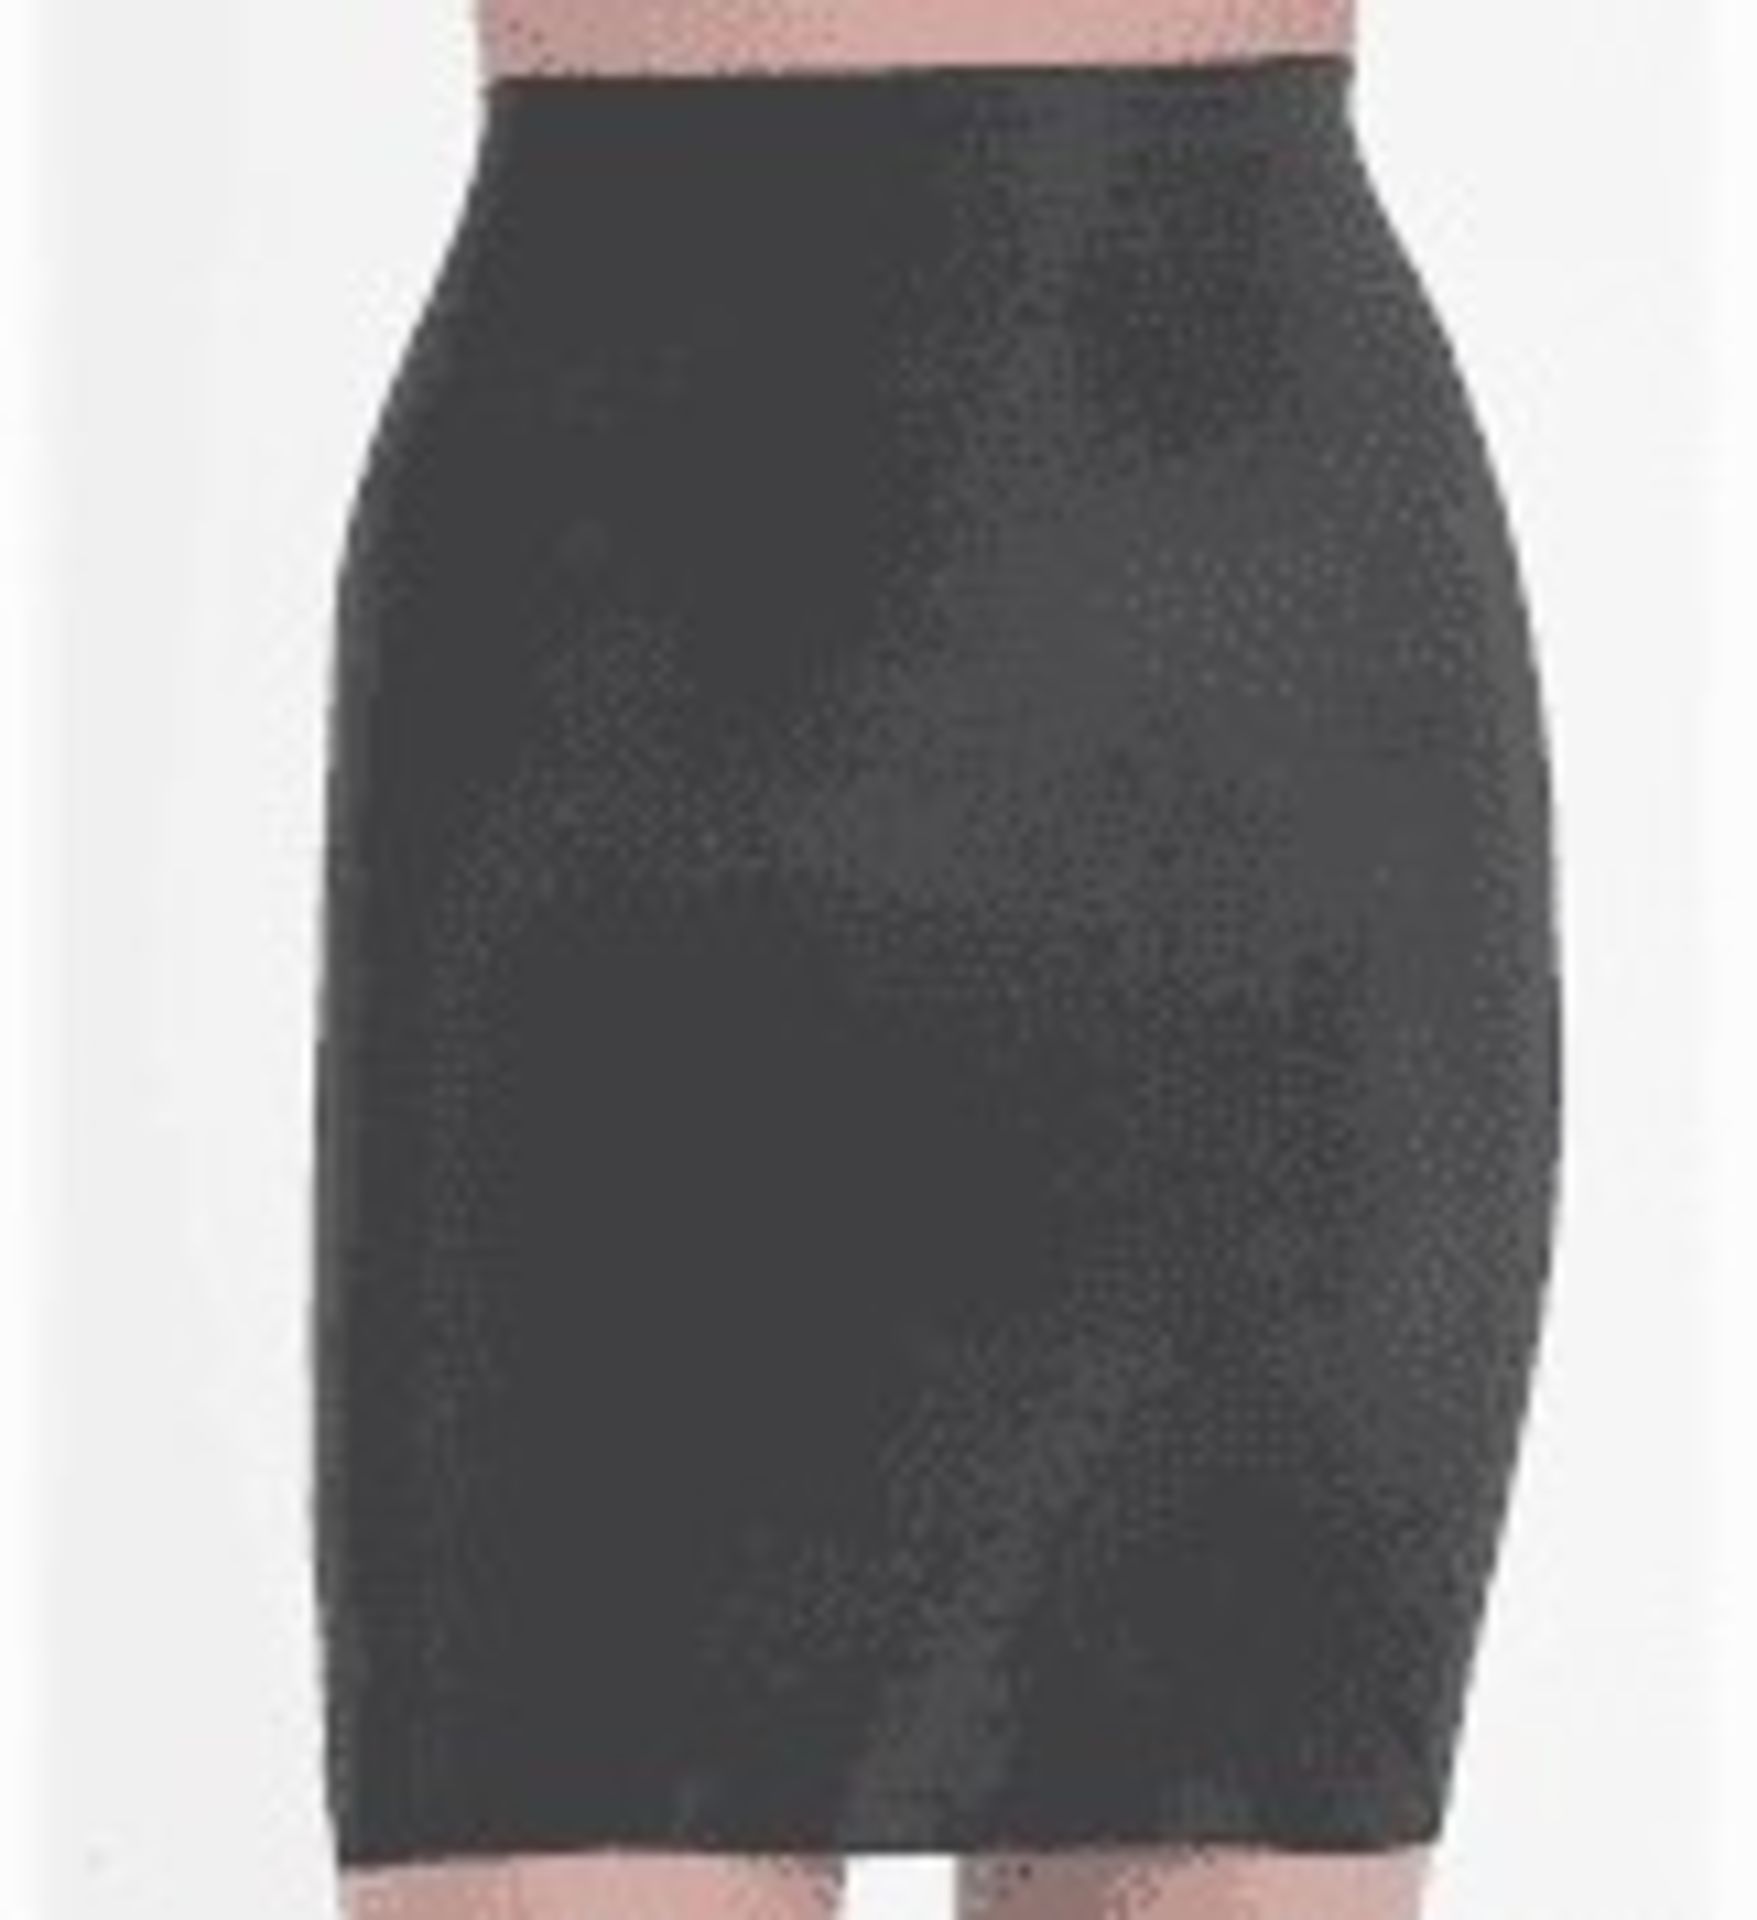 1 LOT TO CONTAIN 5 SPANX SKIRTS IN BOLD BLACK / SIZE 14 / STYLE 1899 / RRP £440.00 (PUBLIC VIEWING